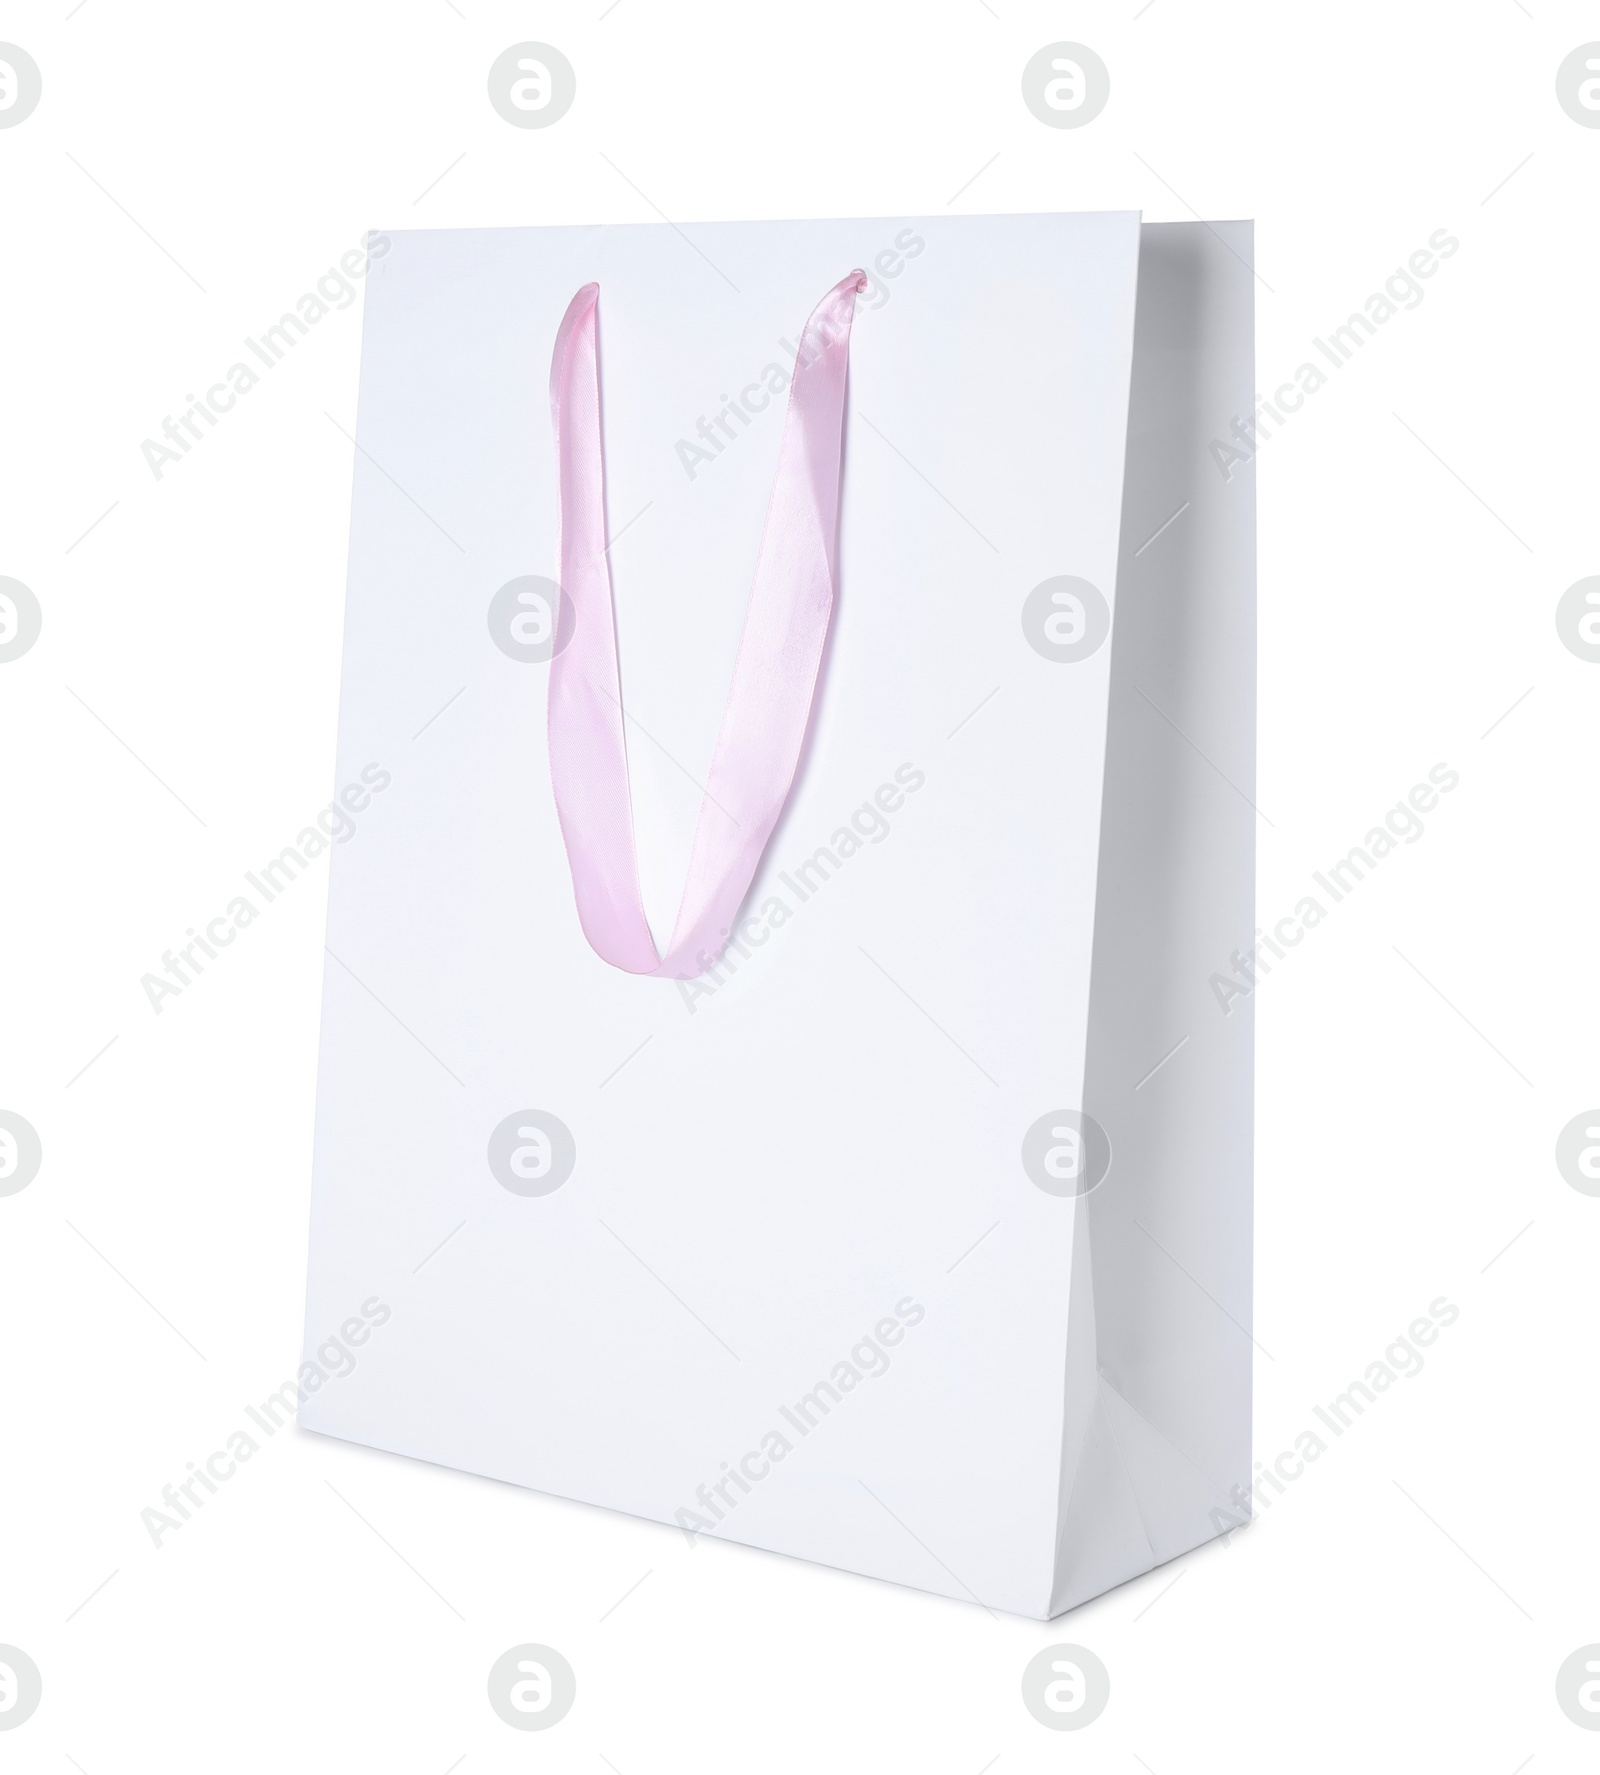 Photo of Paper shopping bag with pink handle isolated on white